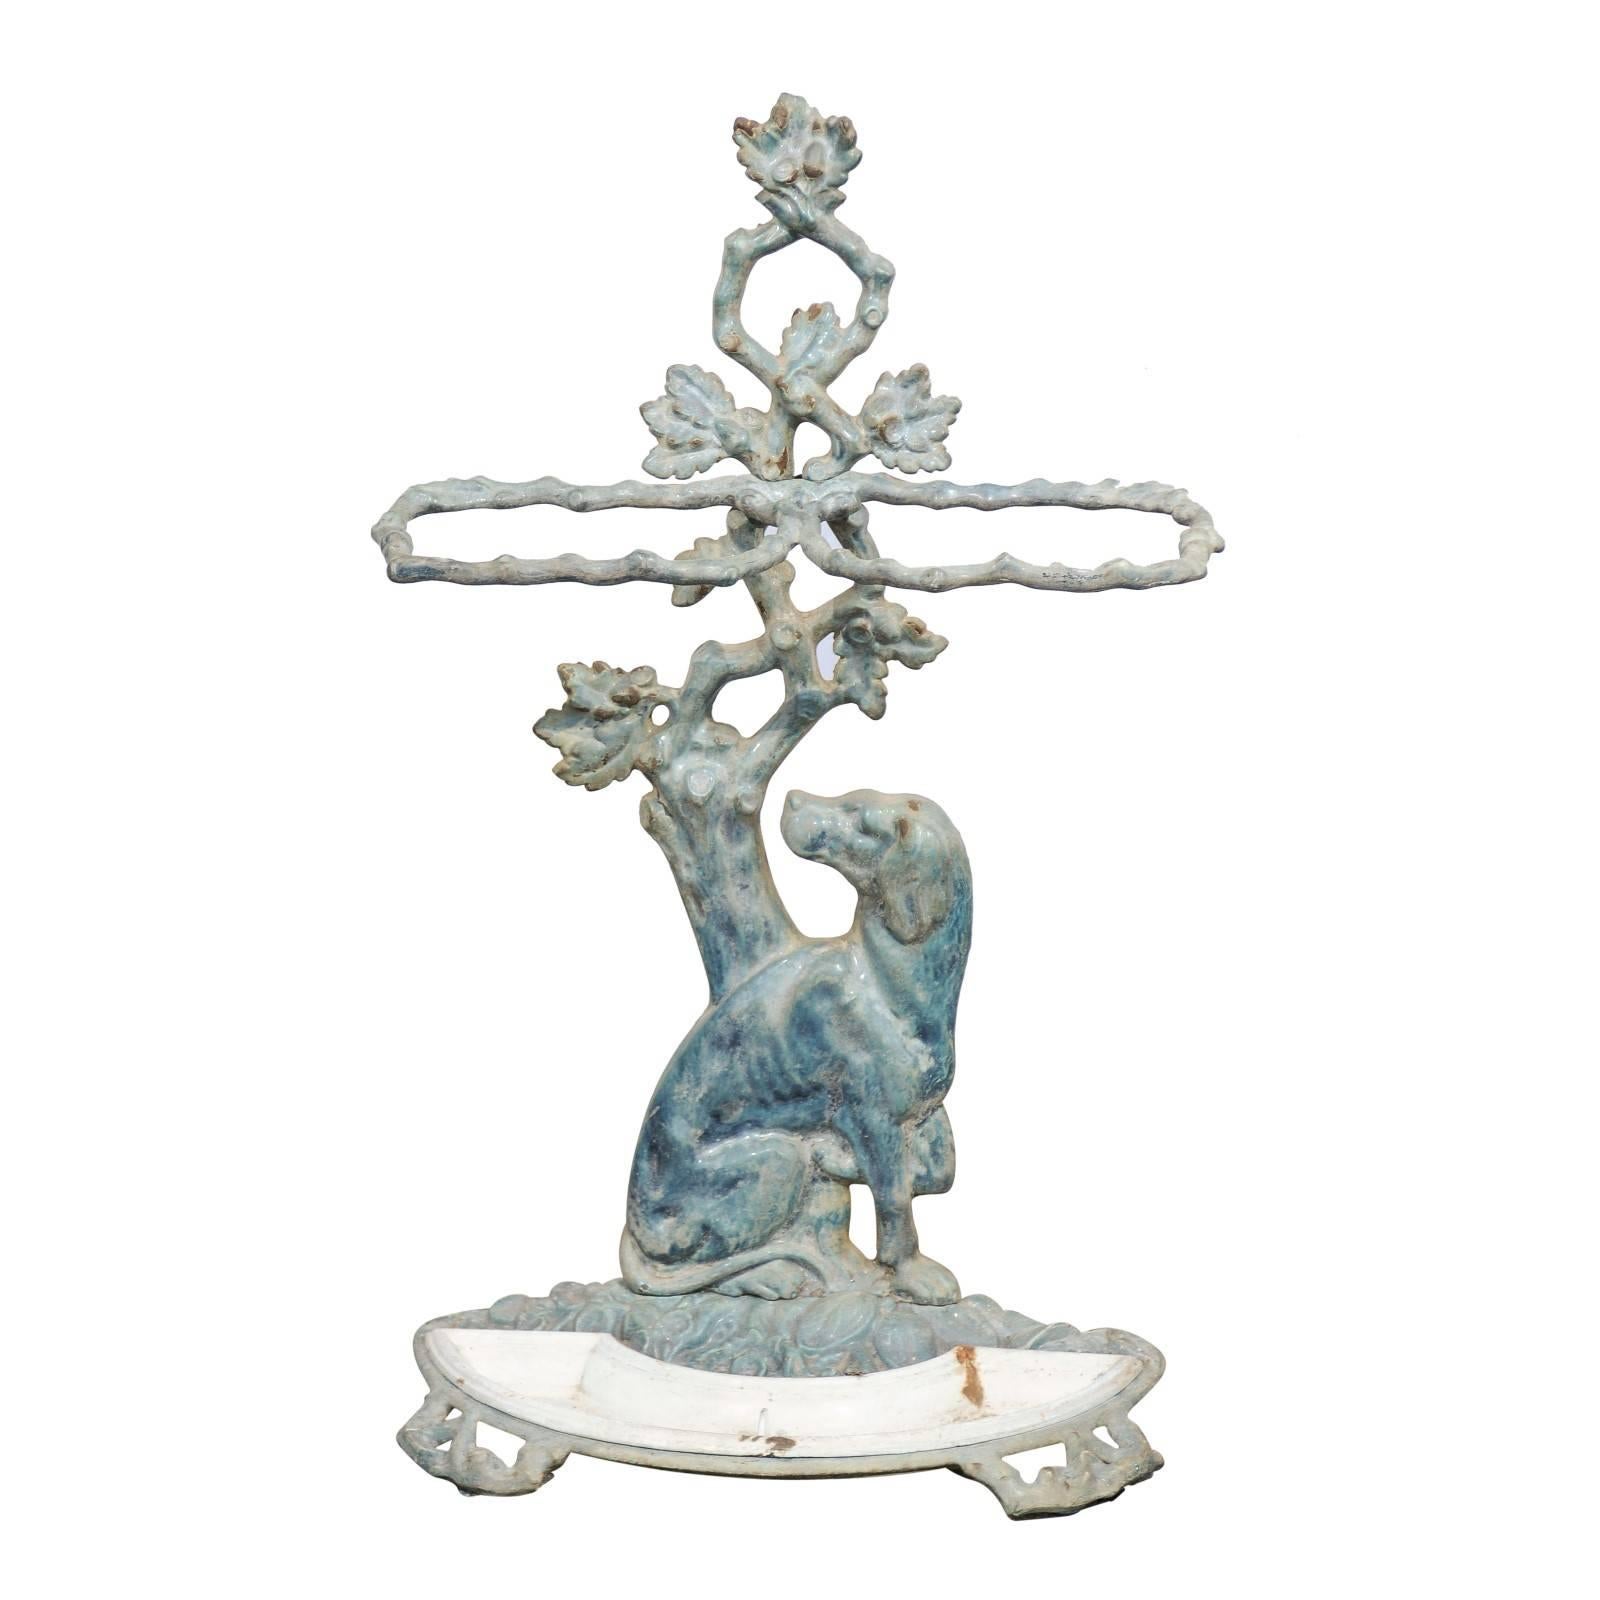 French 1900s Enameled Umbrella Stand Depicting a Dog Sitting in Front of a Tree